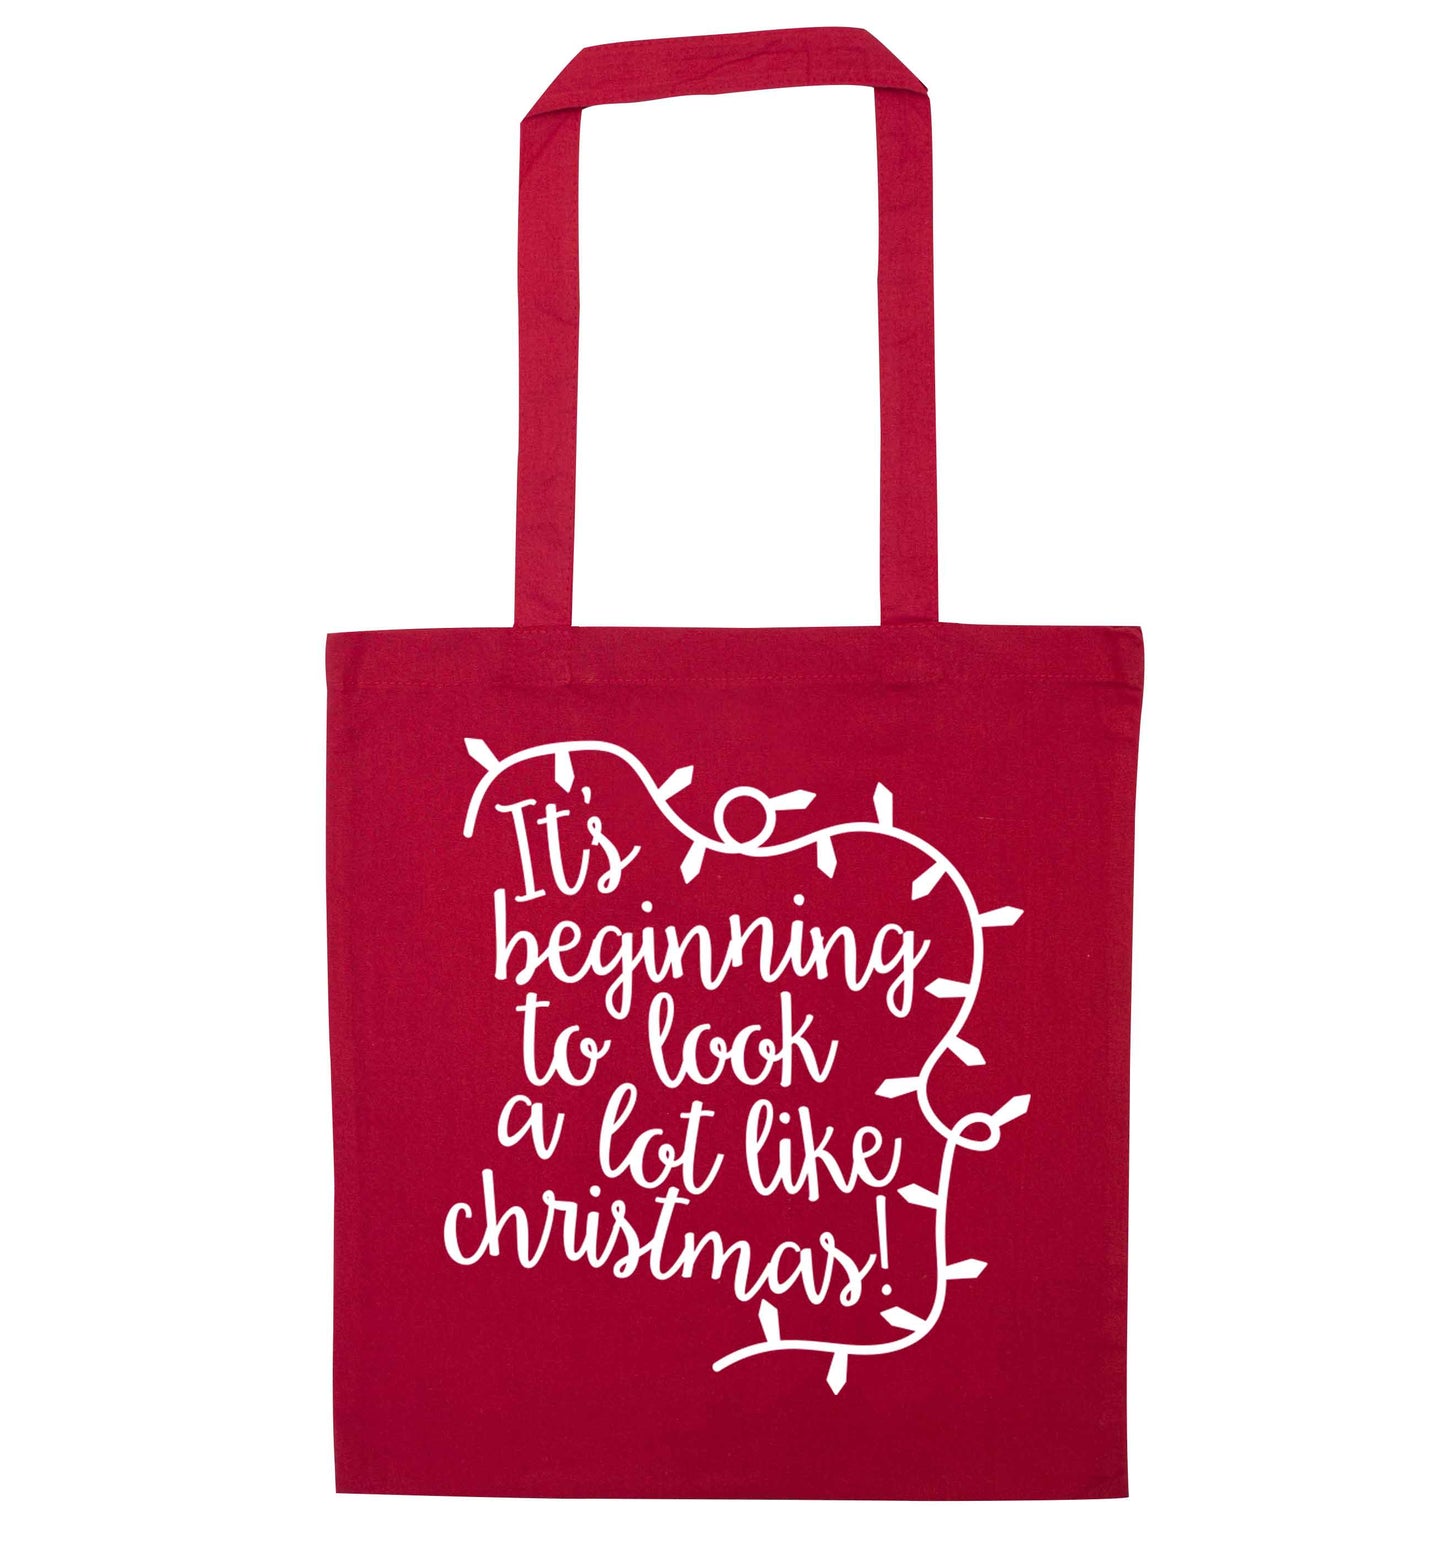 It's beginning to look a lot like Christmas red tote bag